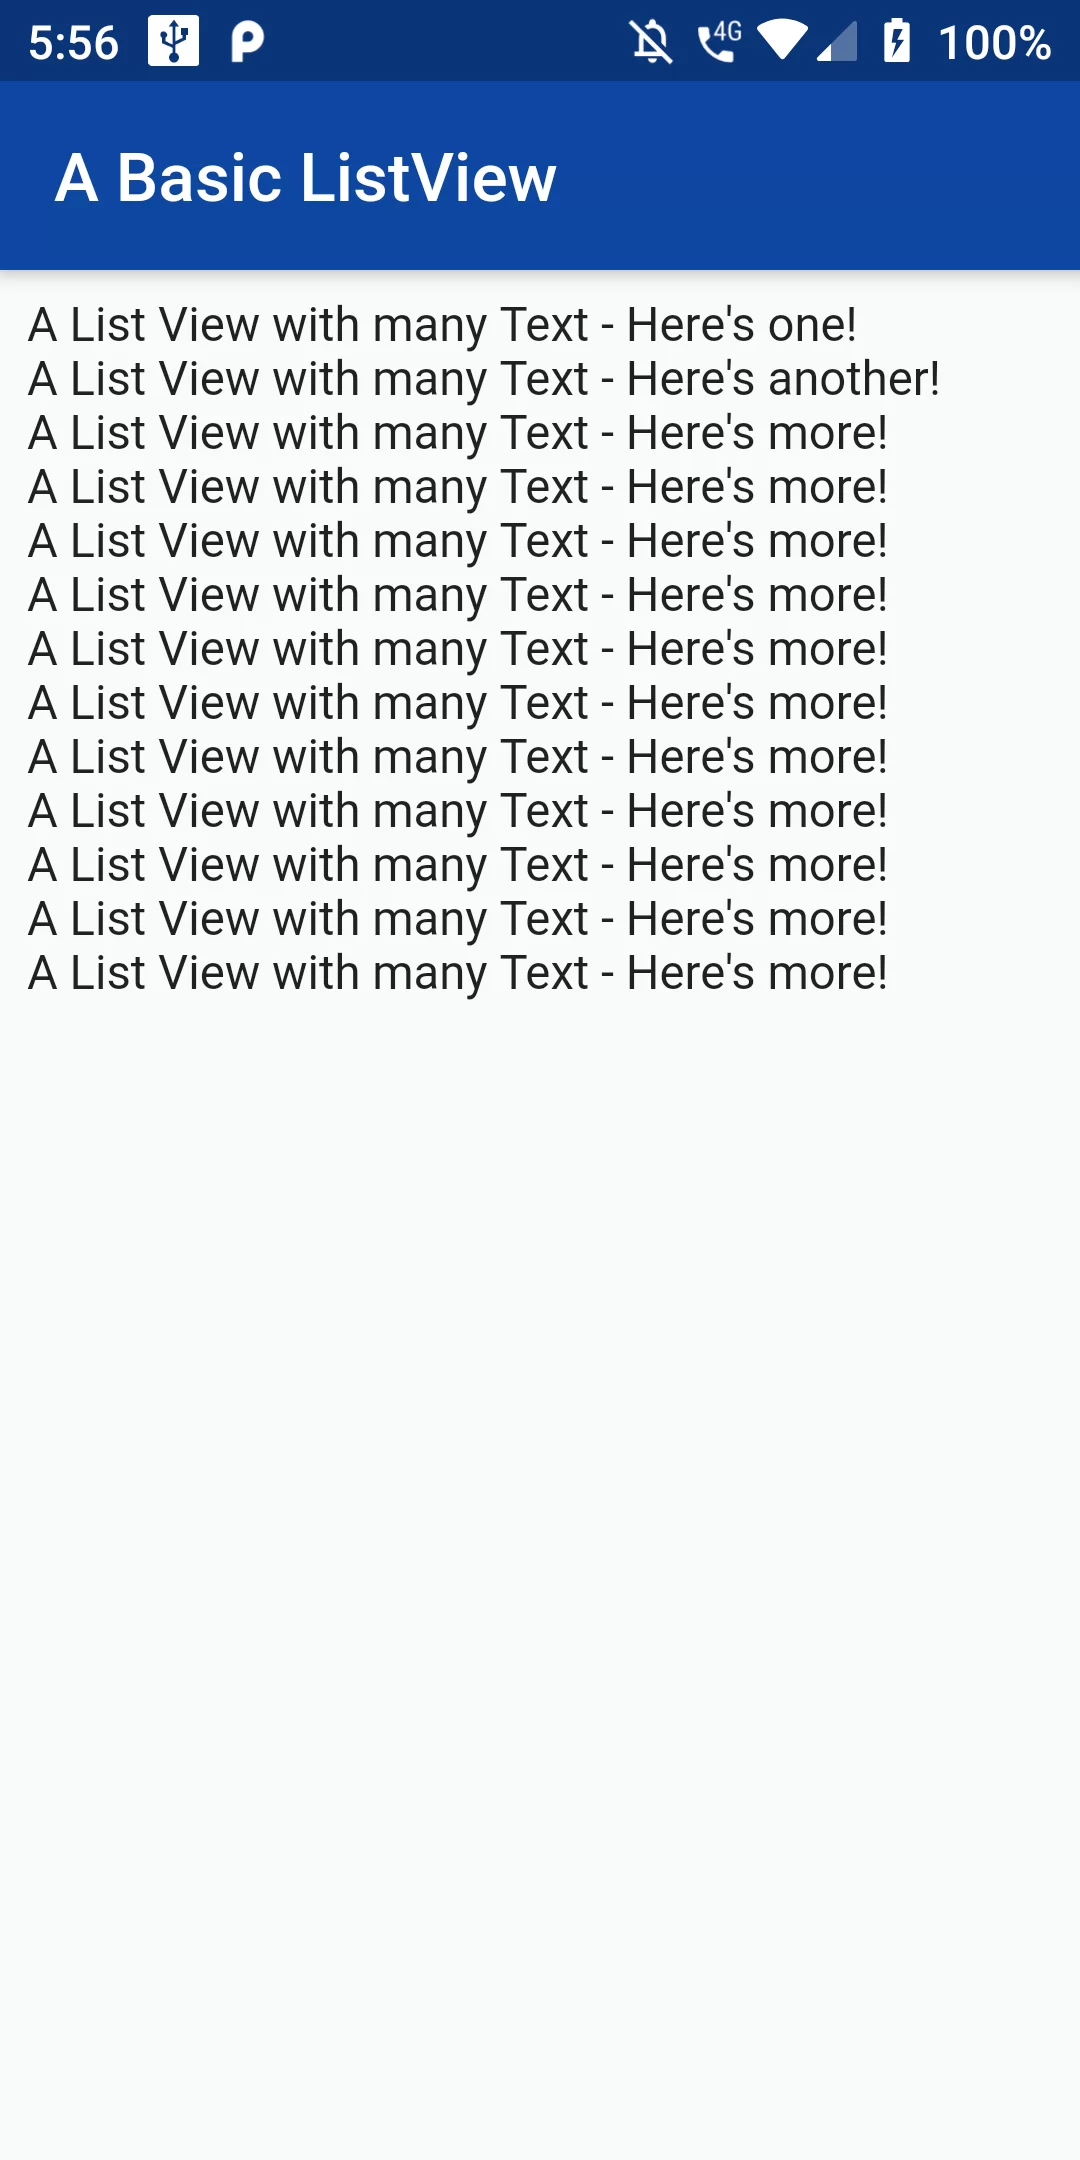 How To Create Basic Listview Using Flutter Android App